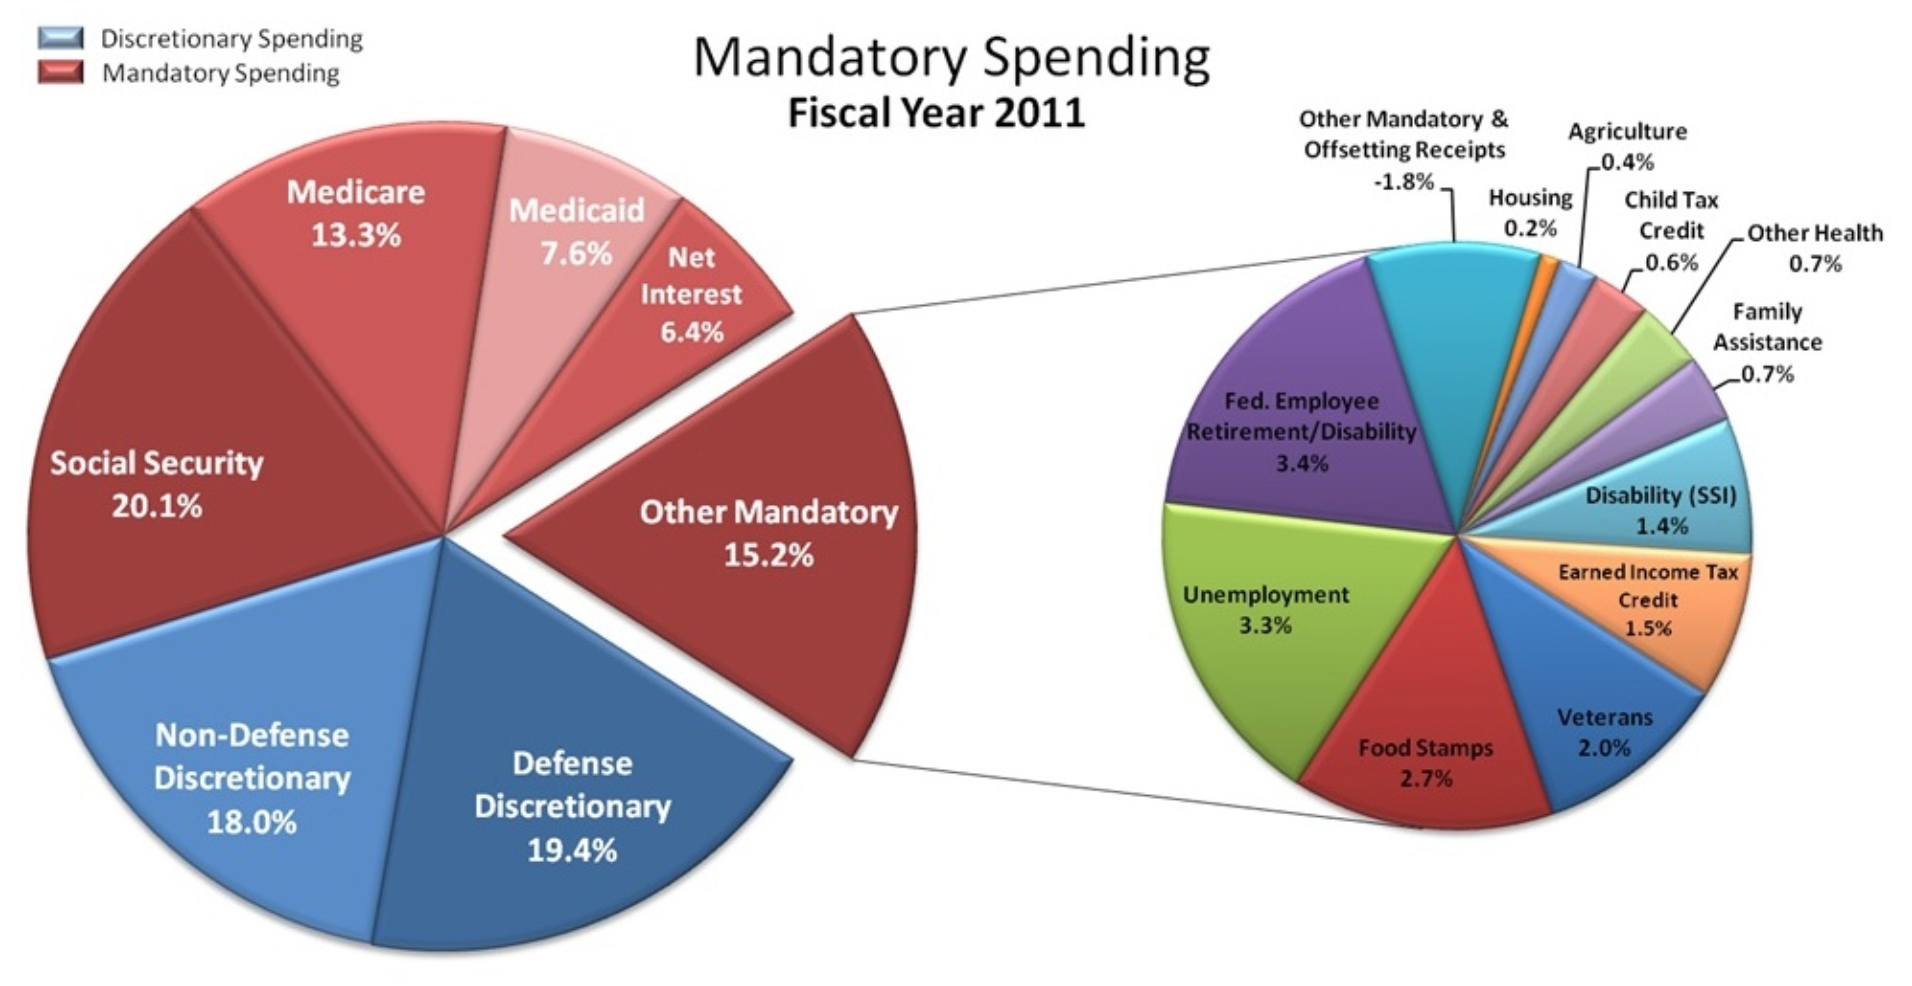 hese two pie charts shows the U.S.’s combined 2011 Mandatory Spending, also known as entitlement programs. These programs benefit qualifying citizens.